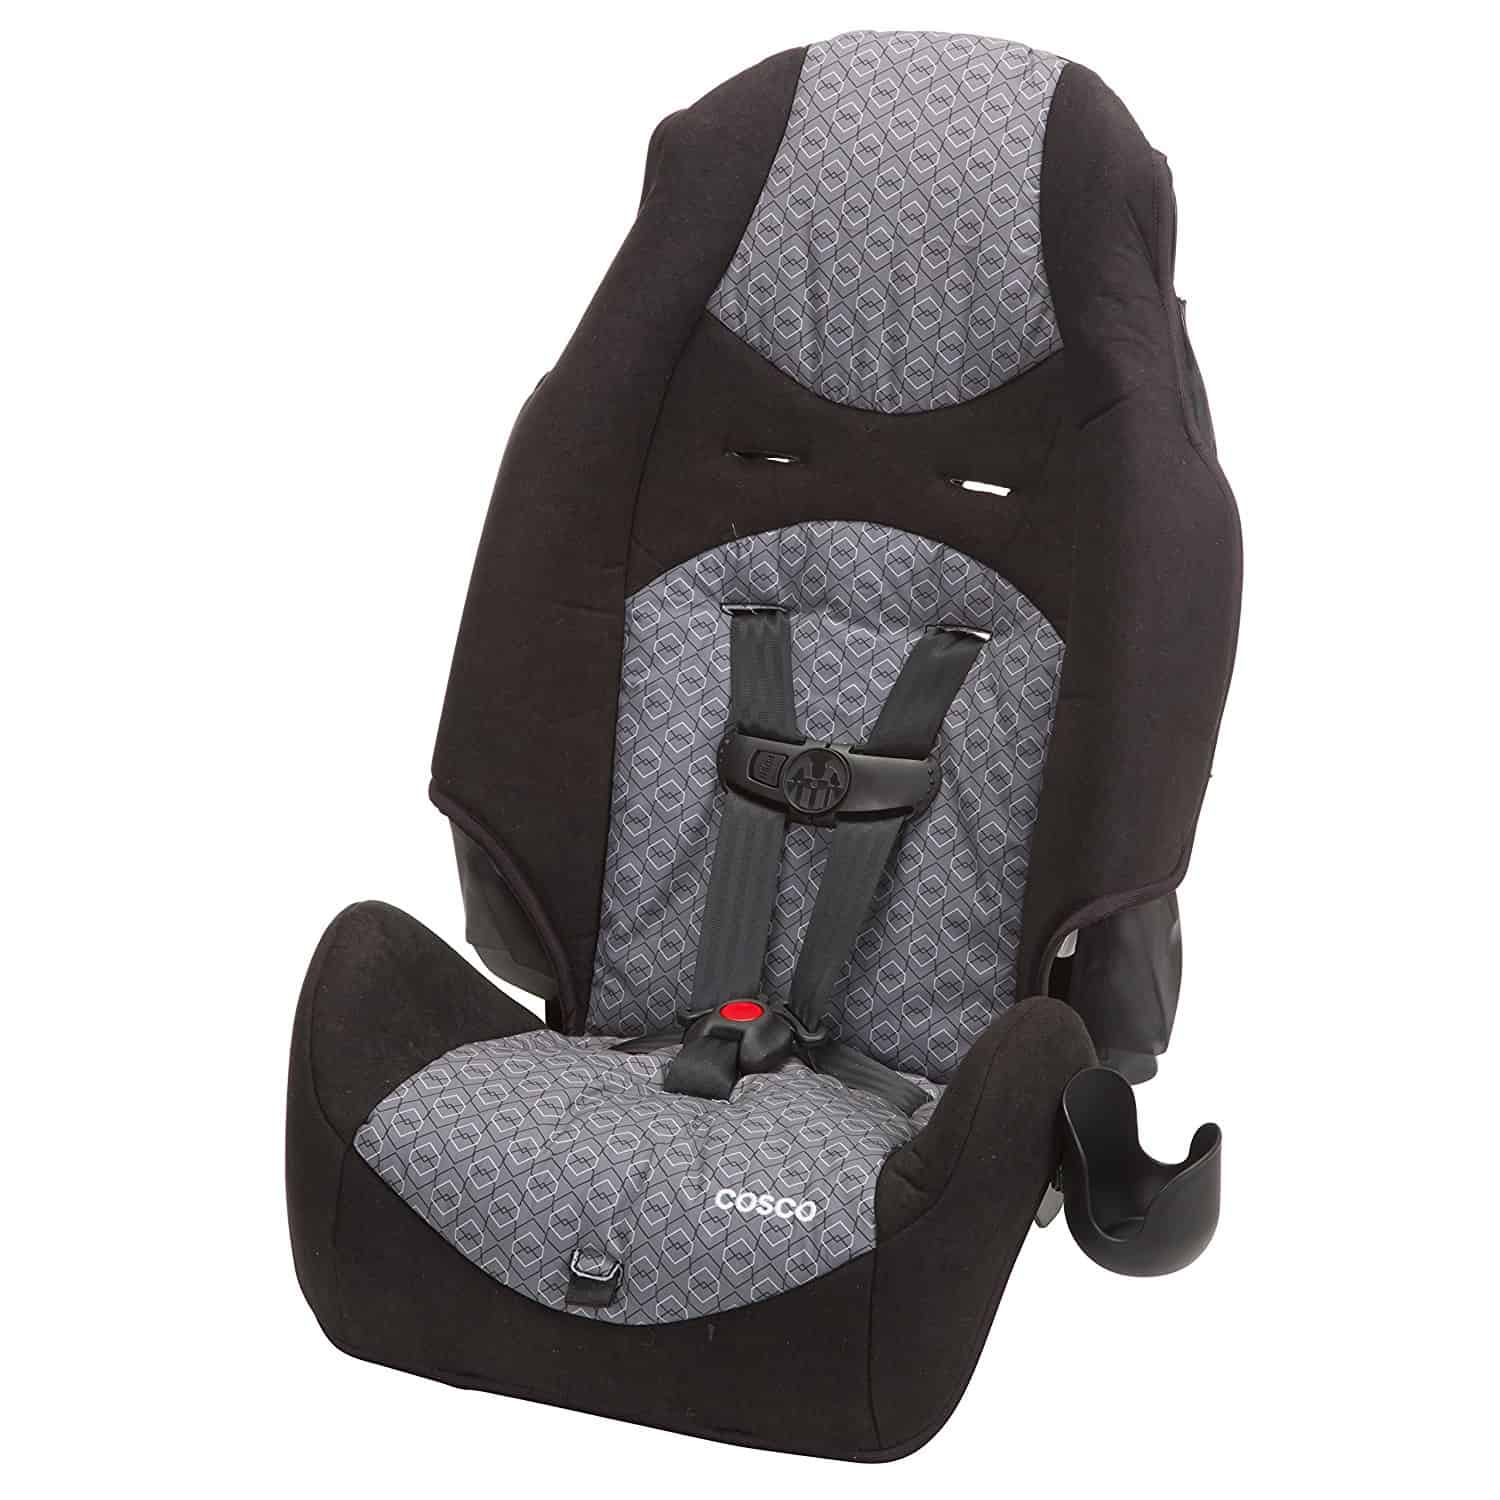 cosco 5 point harness car seat